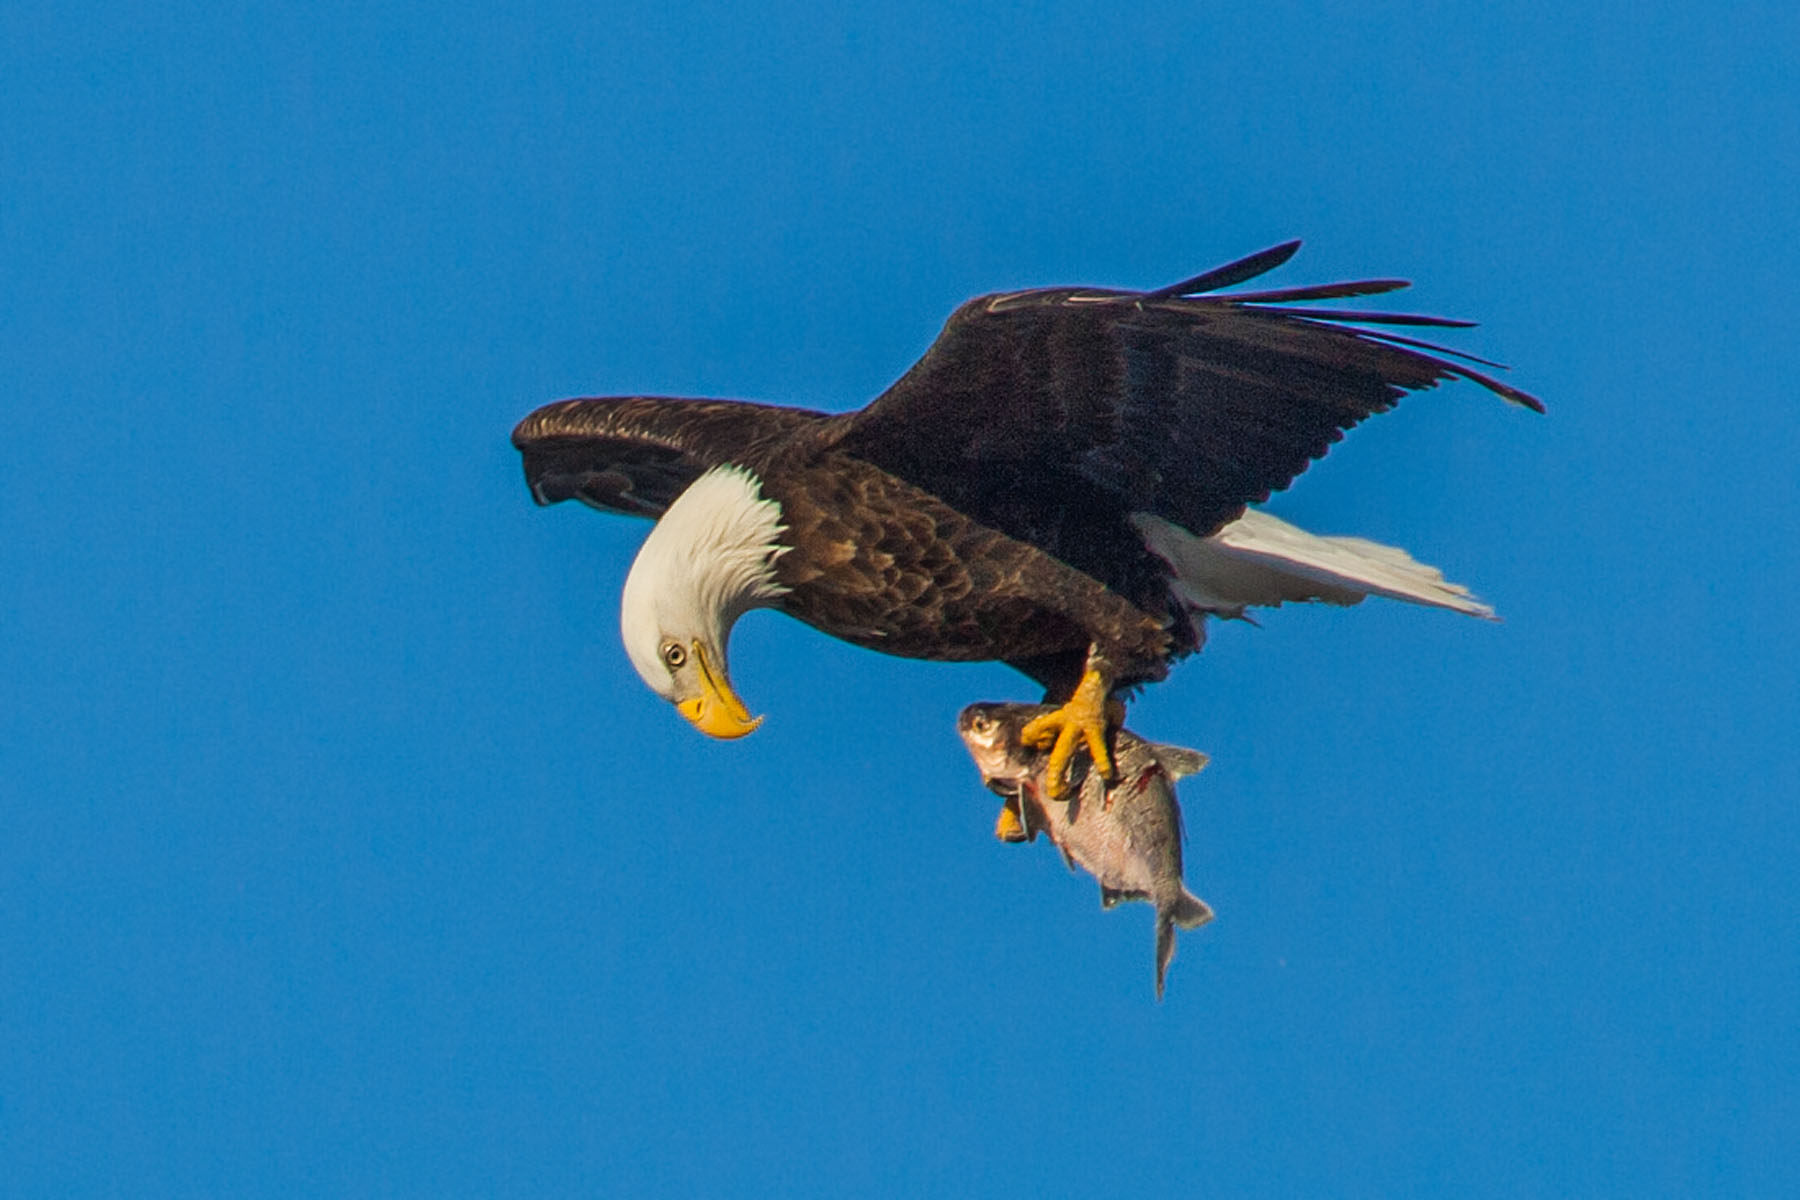 Bald eagle checks out its catch, Mississippi River.  Click for next photo.